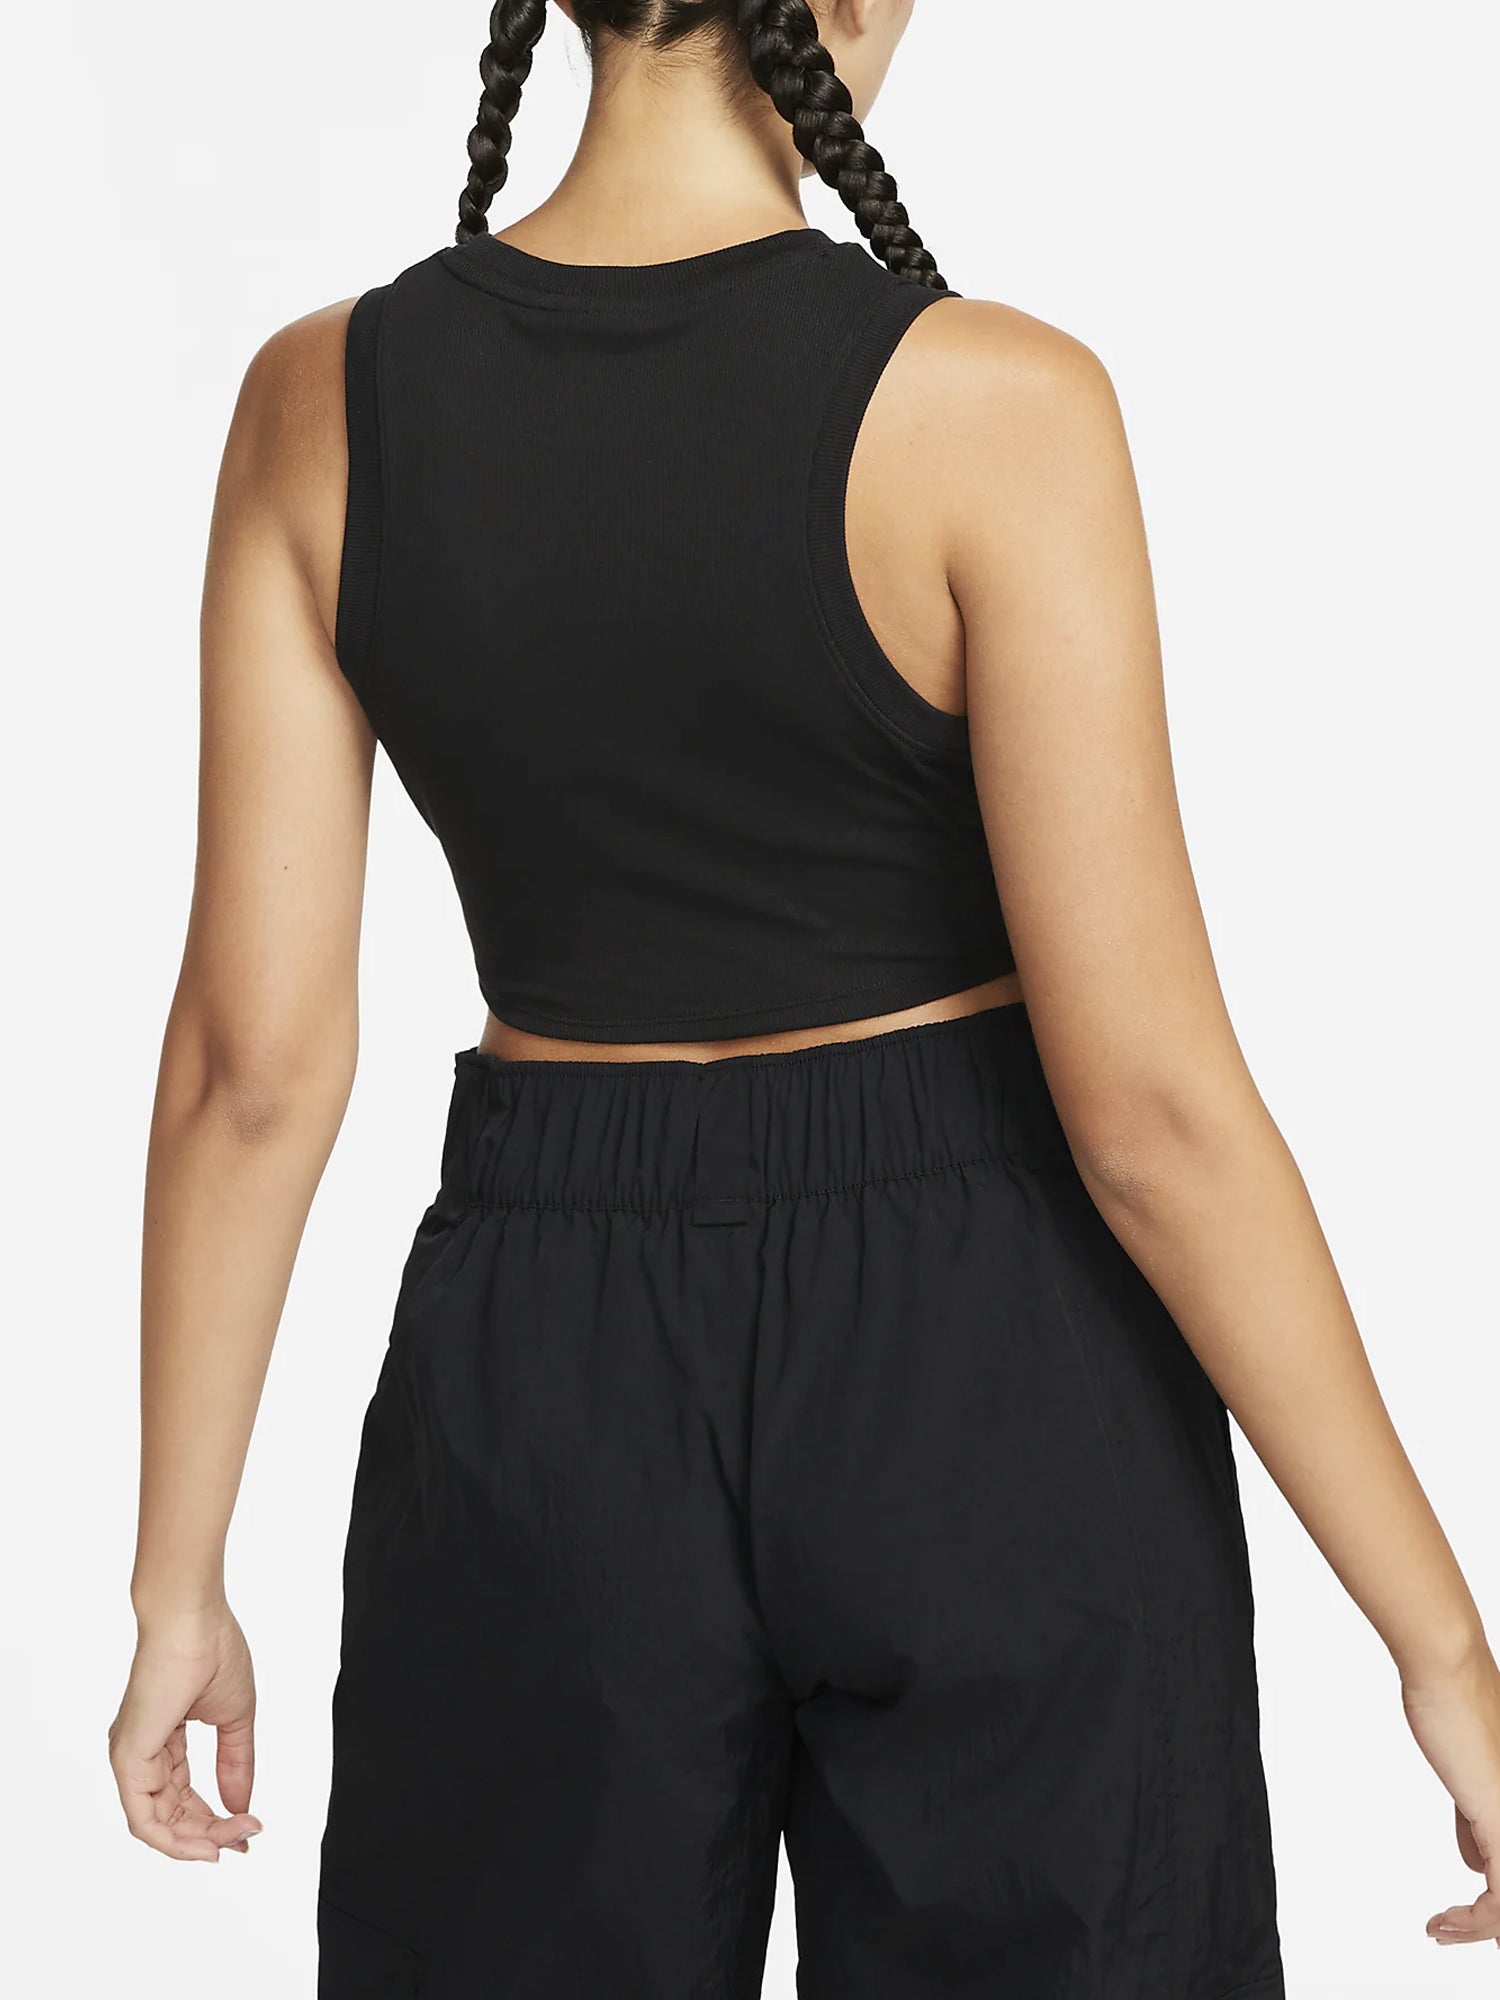 NIKE TOP CROPPED ADERENTE NERO